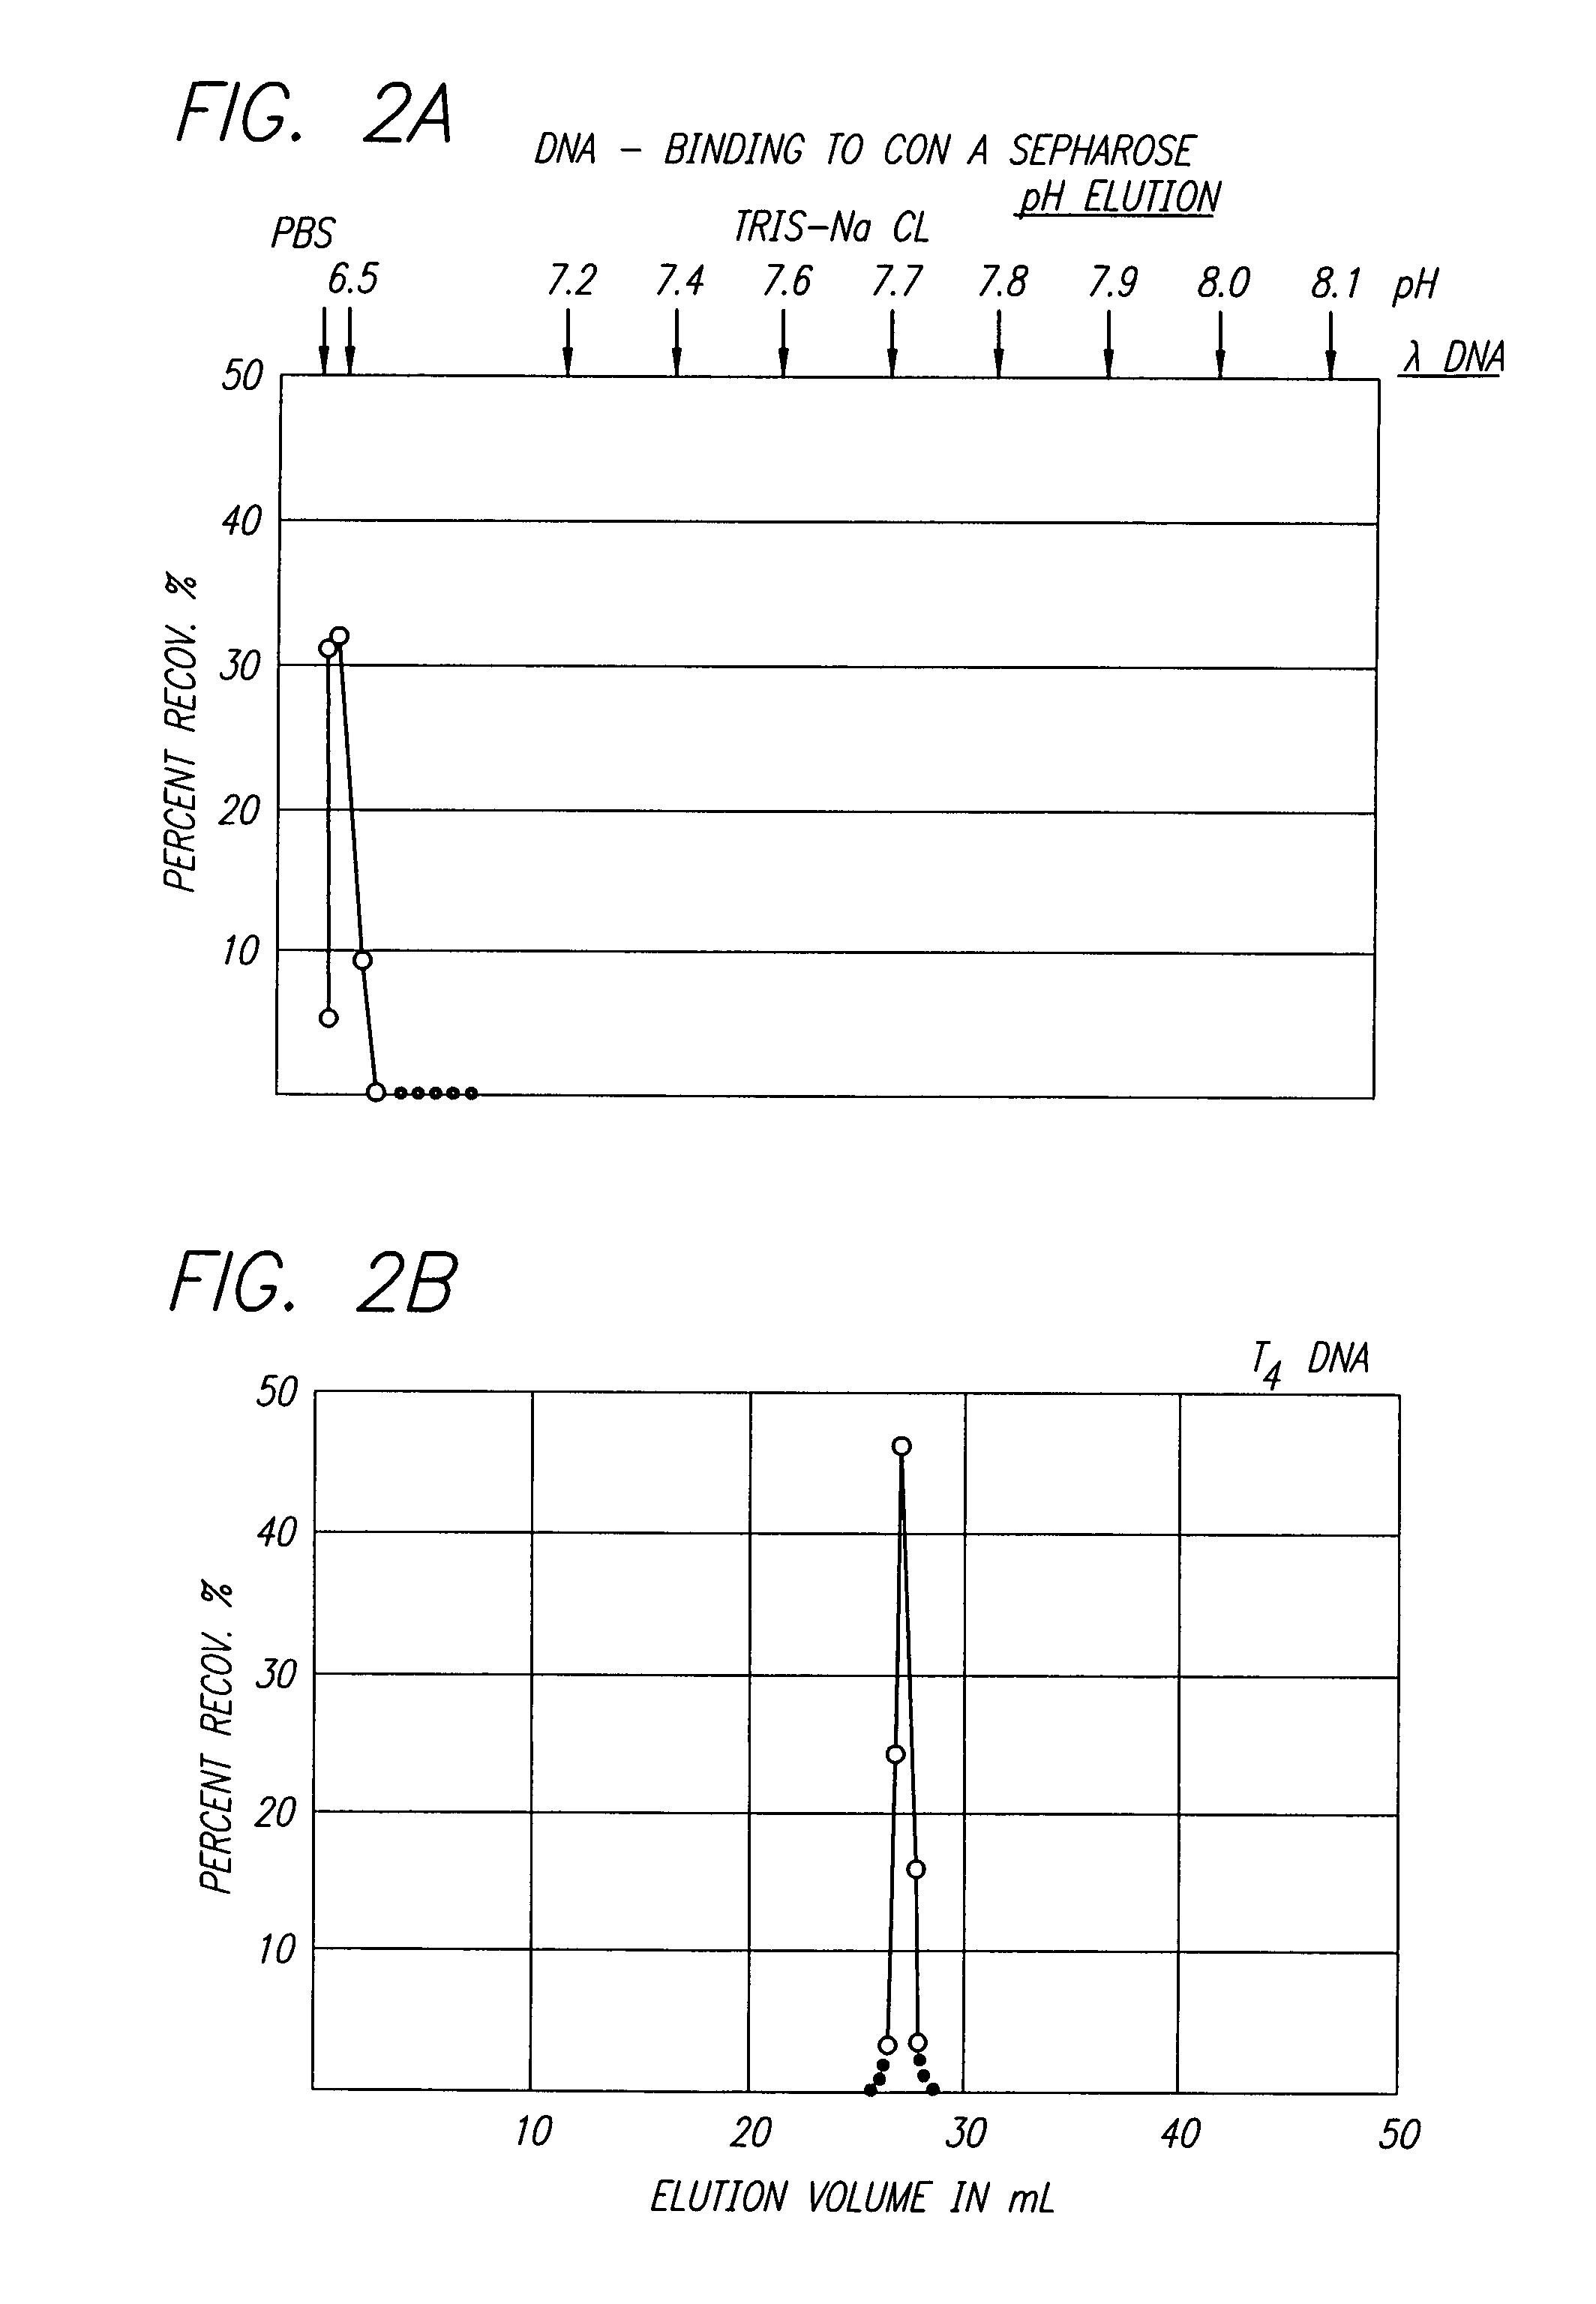 Nucleic acid sequencing processes using non-radioactive detectable modified or labeled nucleotides or nucleotide analogs, and other processes for nucleic acid detection and chromosomal characterization using such non-radioactive detectable modified or labeled nucleotides or nucleotide analogs